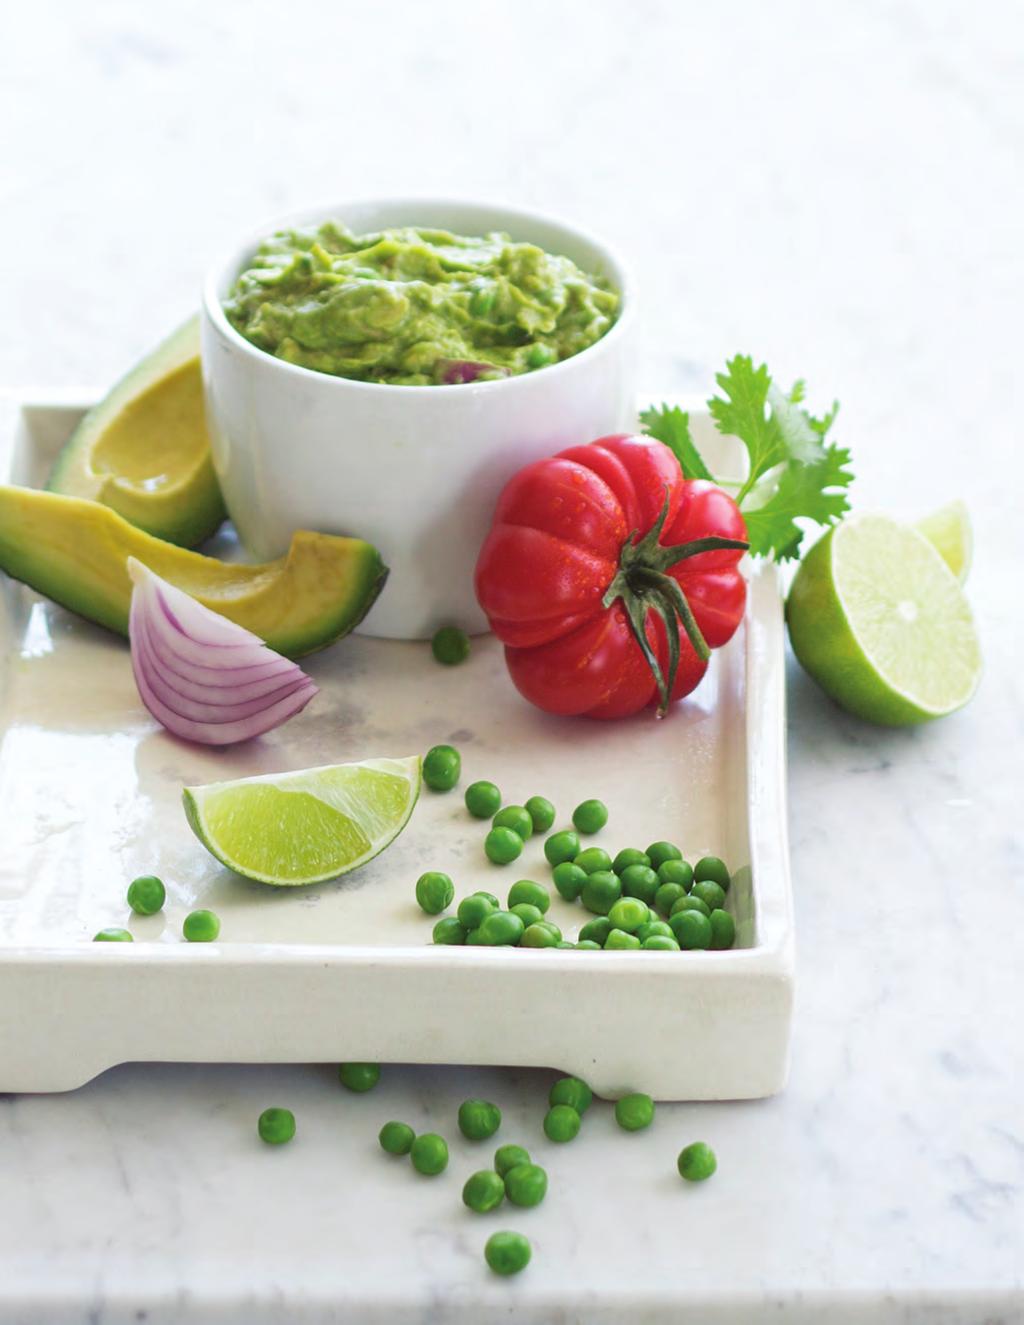 Low Fat Mock-a-Mole Prep time: 10 minutes 1 avocado, peeled, pitted and mashed 1 cup cooked green peas ¼ cup chopped fresh tomato 2 tablespoons chopped fresh cilantro plus more for garnish 1